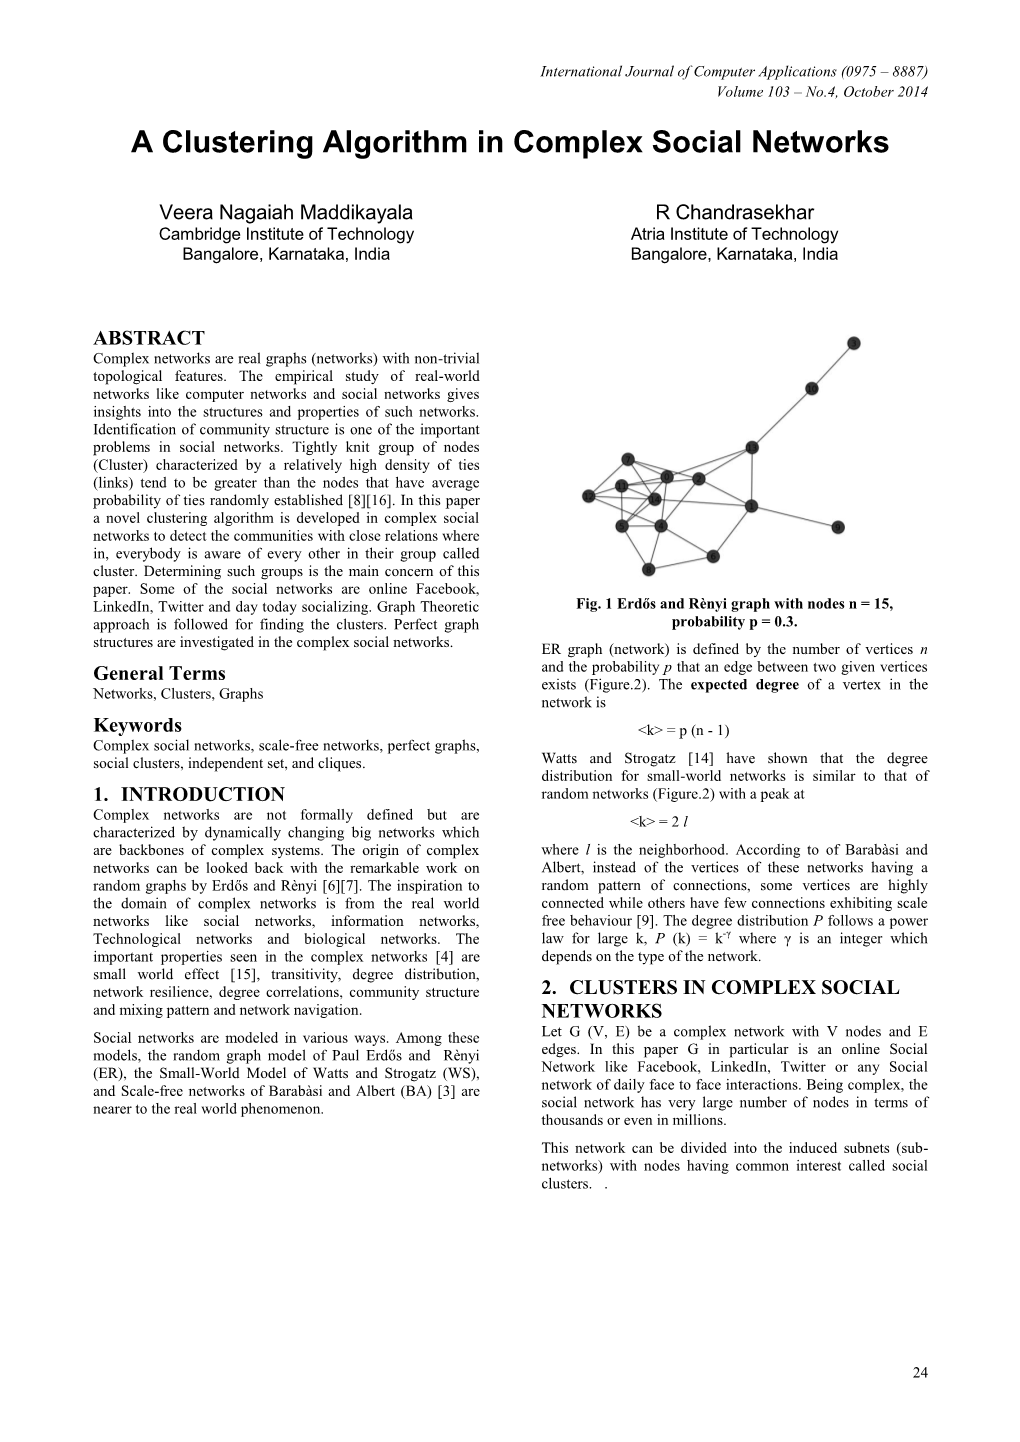 A Clustering Algorithm in Complex Social Networks